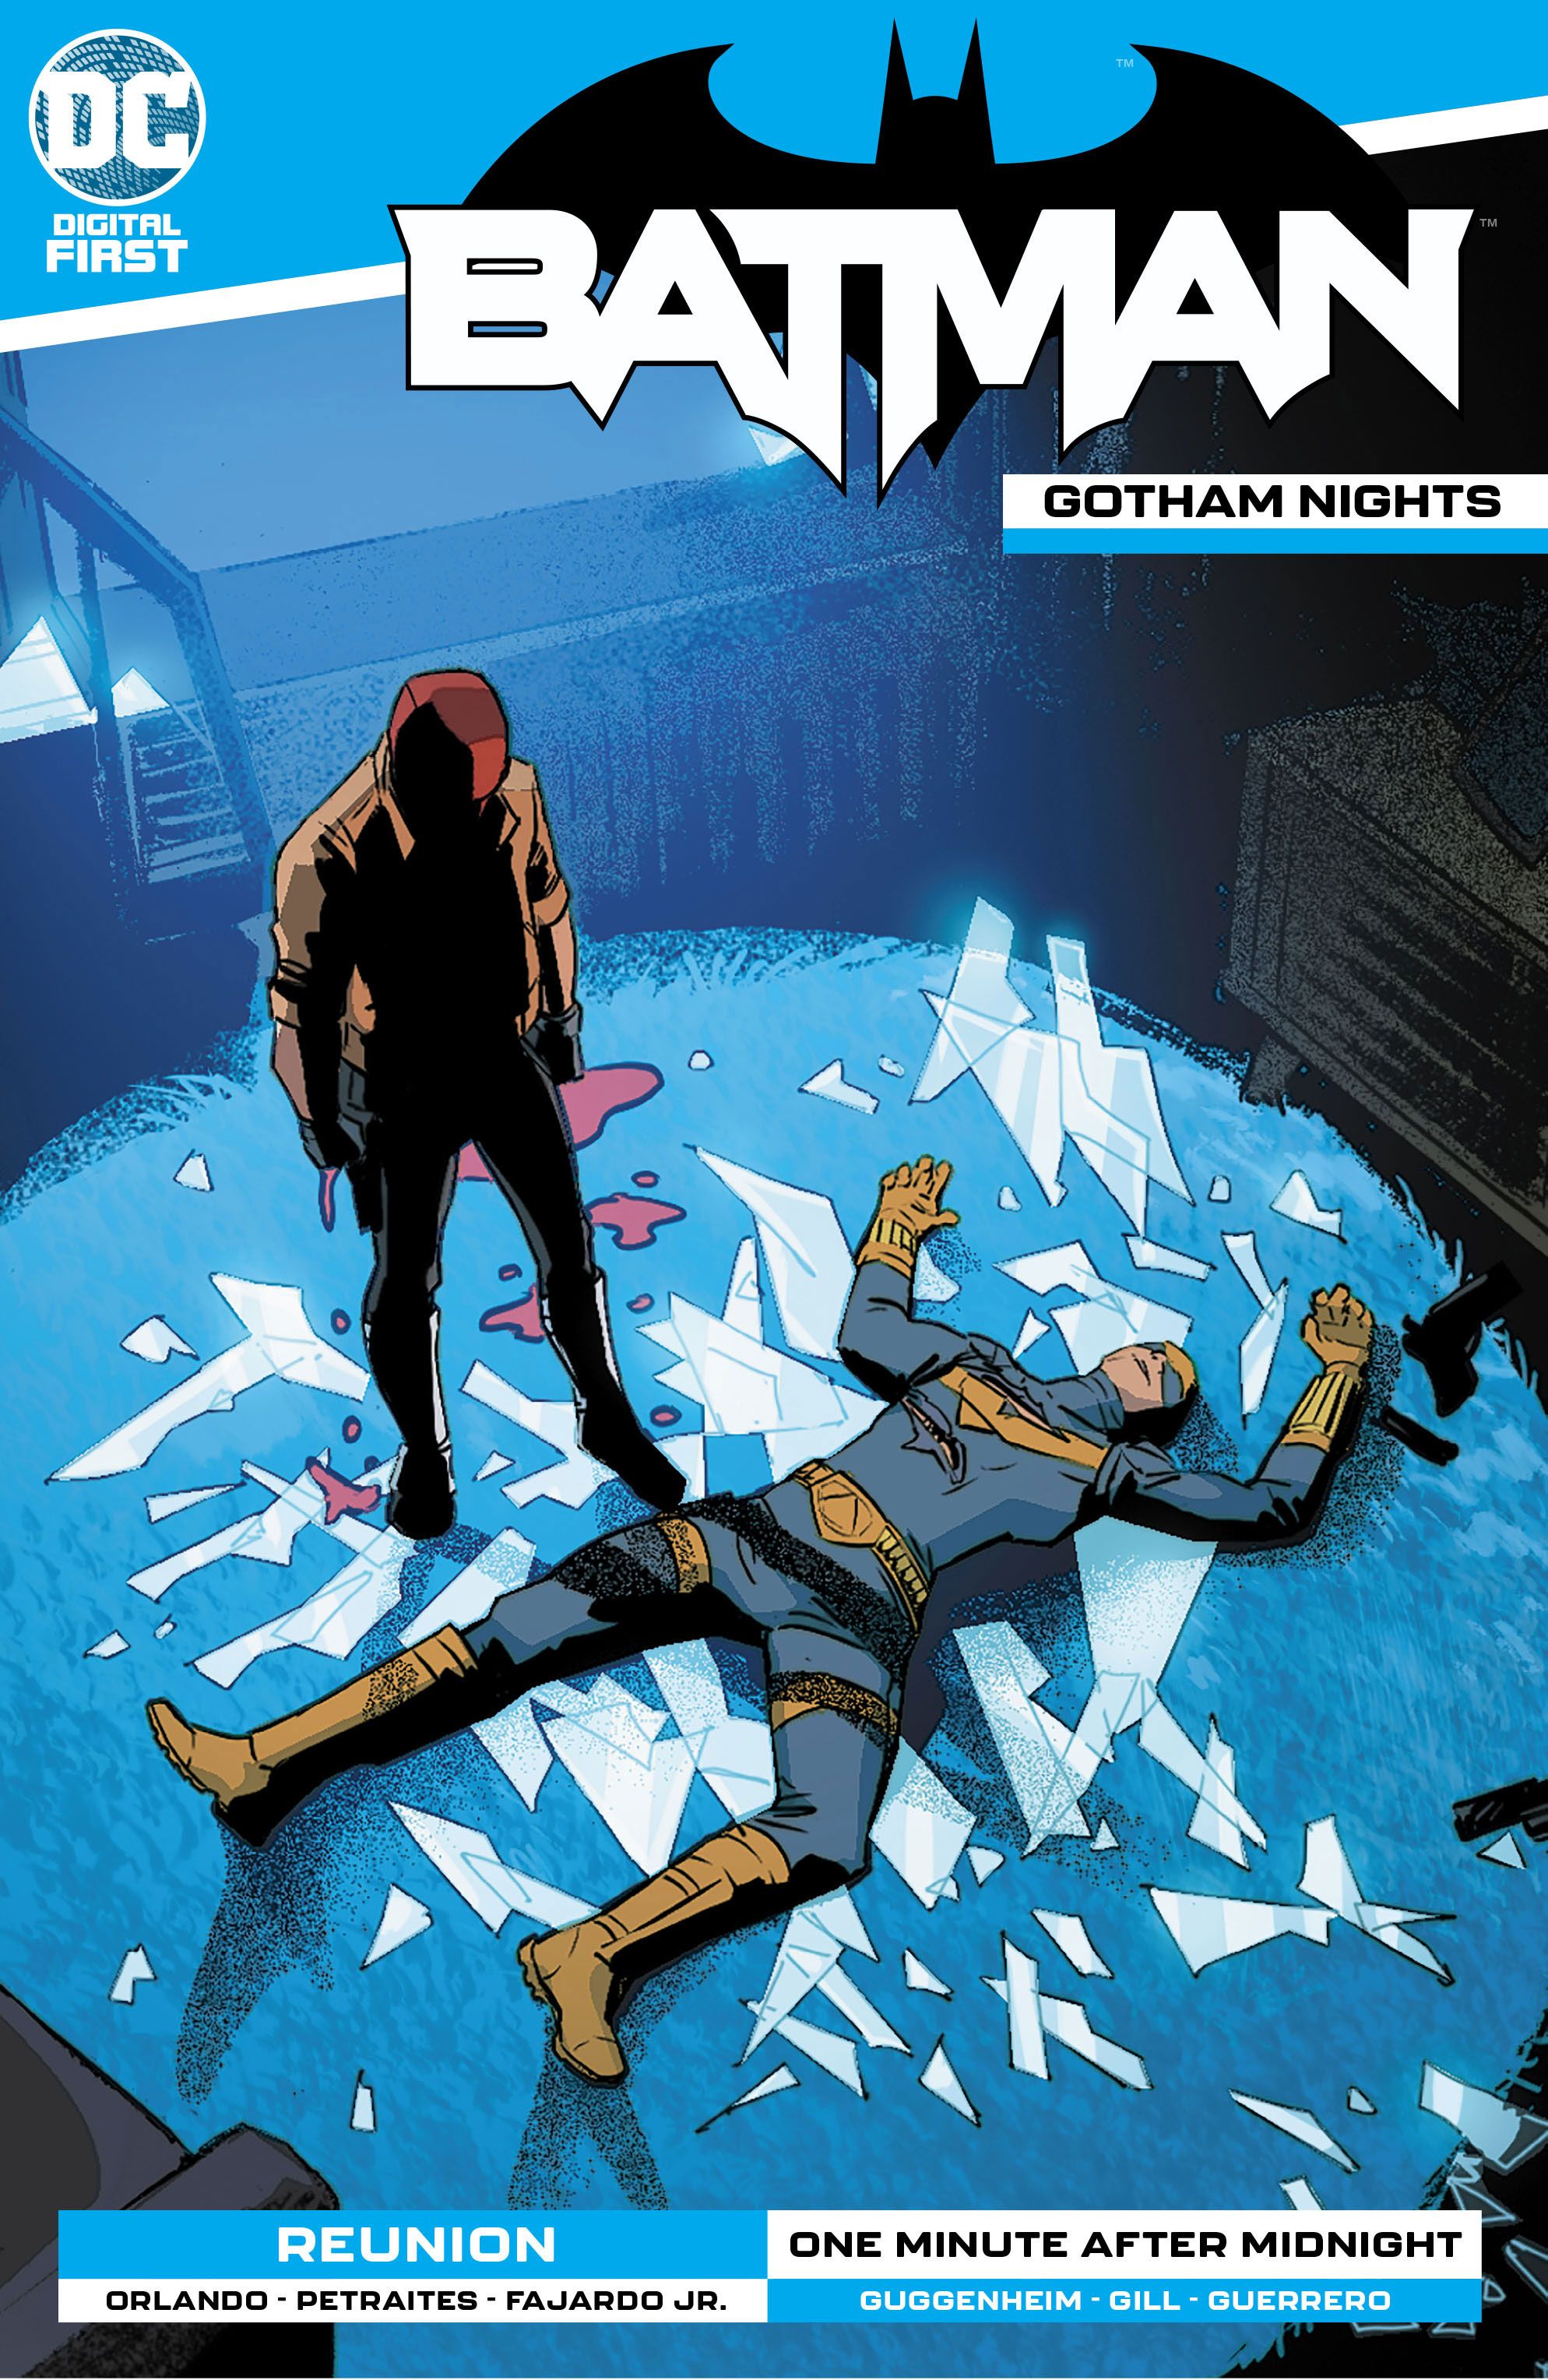 Red Hood Reminds Batman Fans: His Childhood is a Nightmare